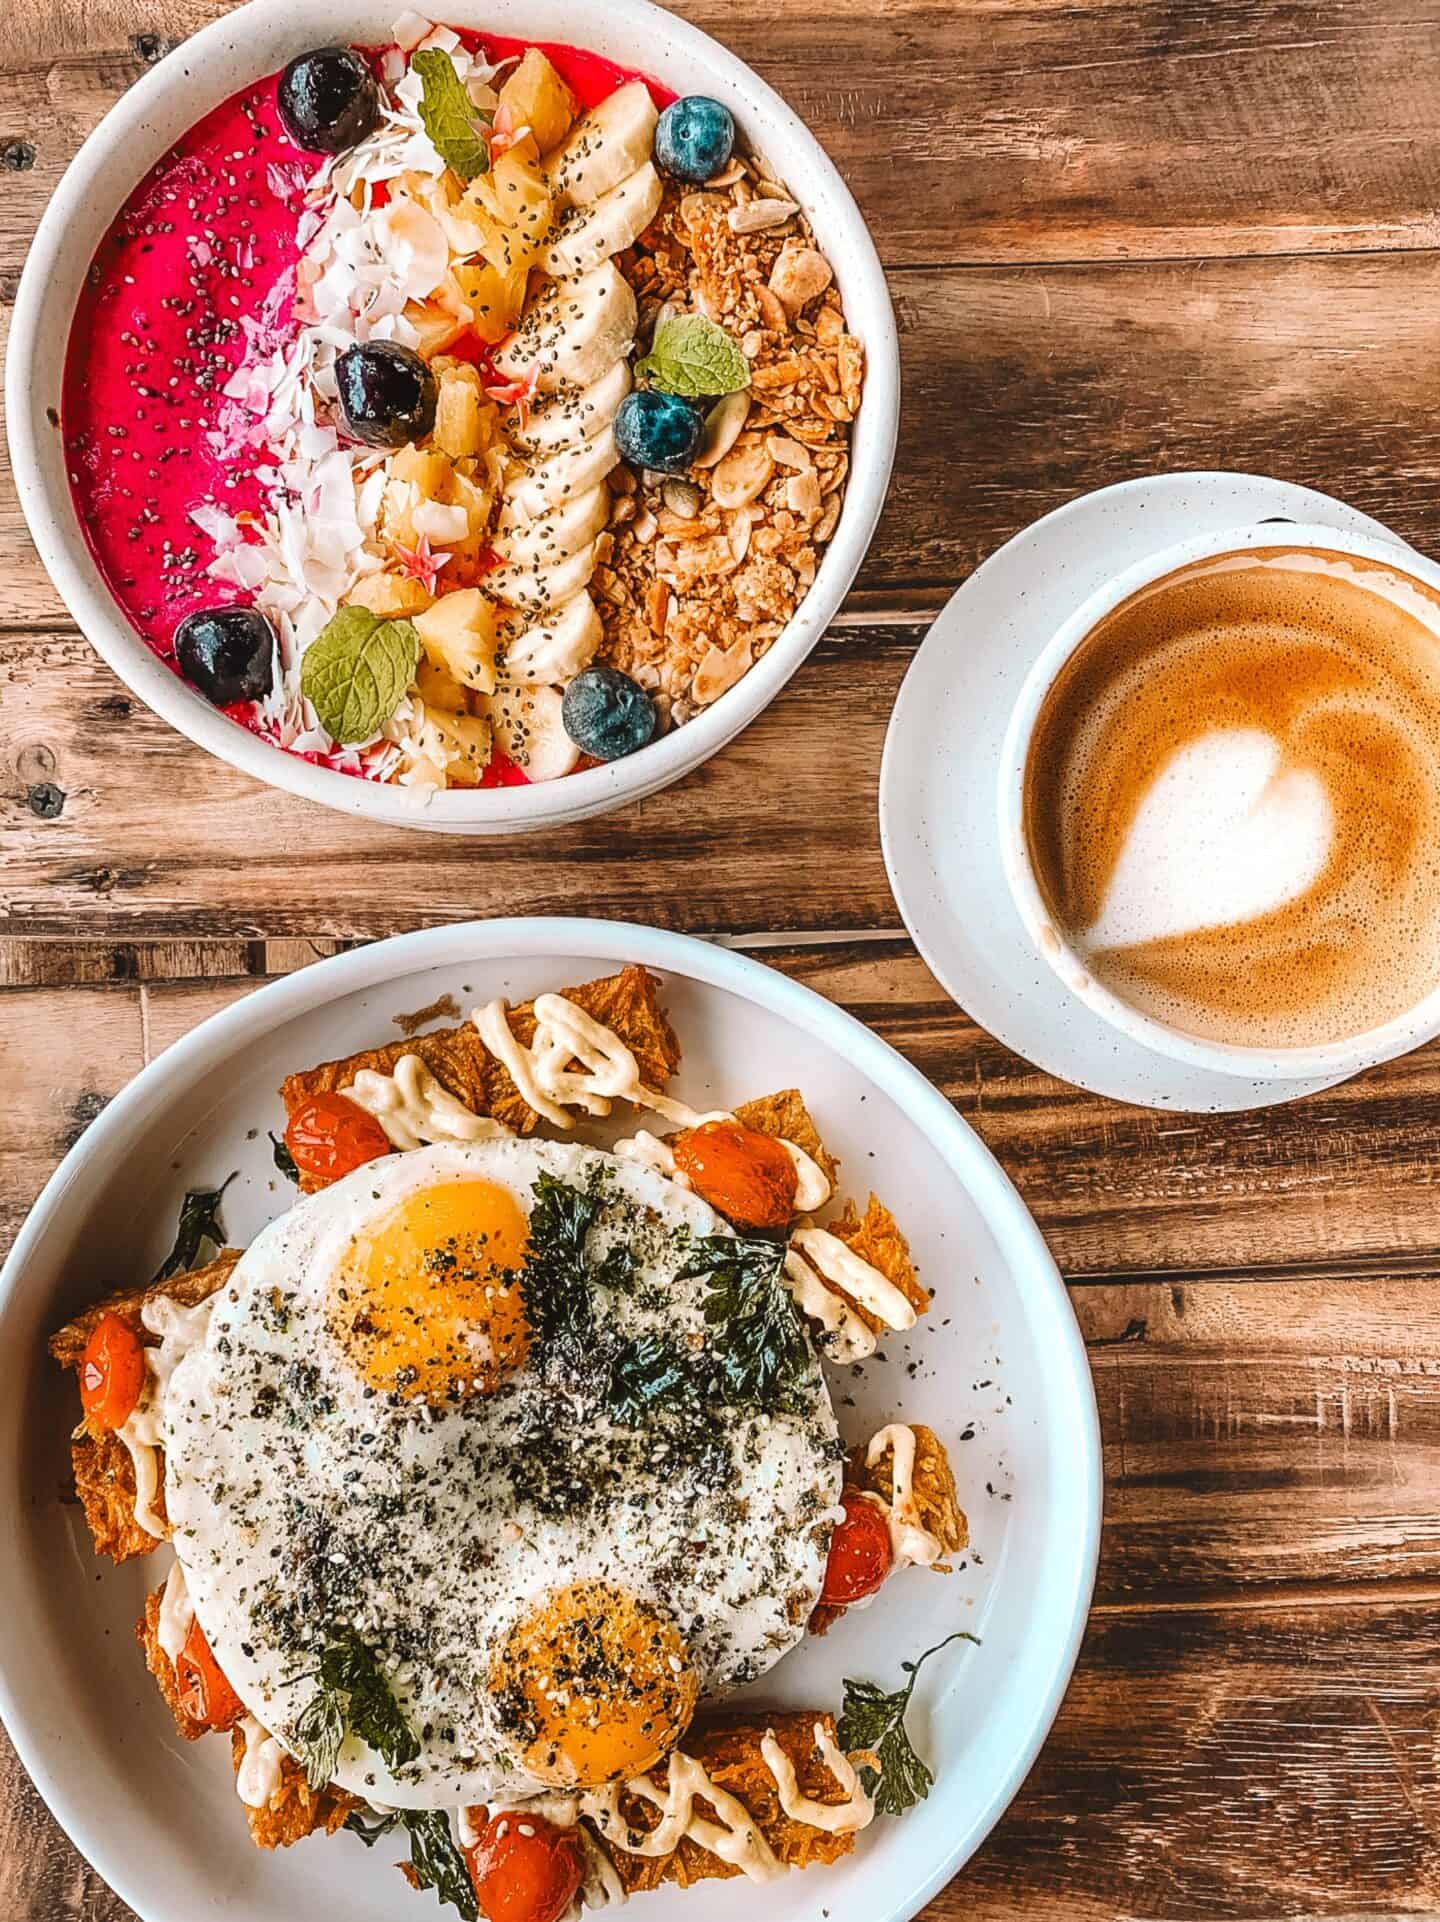 A fresh smoothie bowl, coffee and eggs from Mimpi Grocery in Canggu